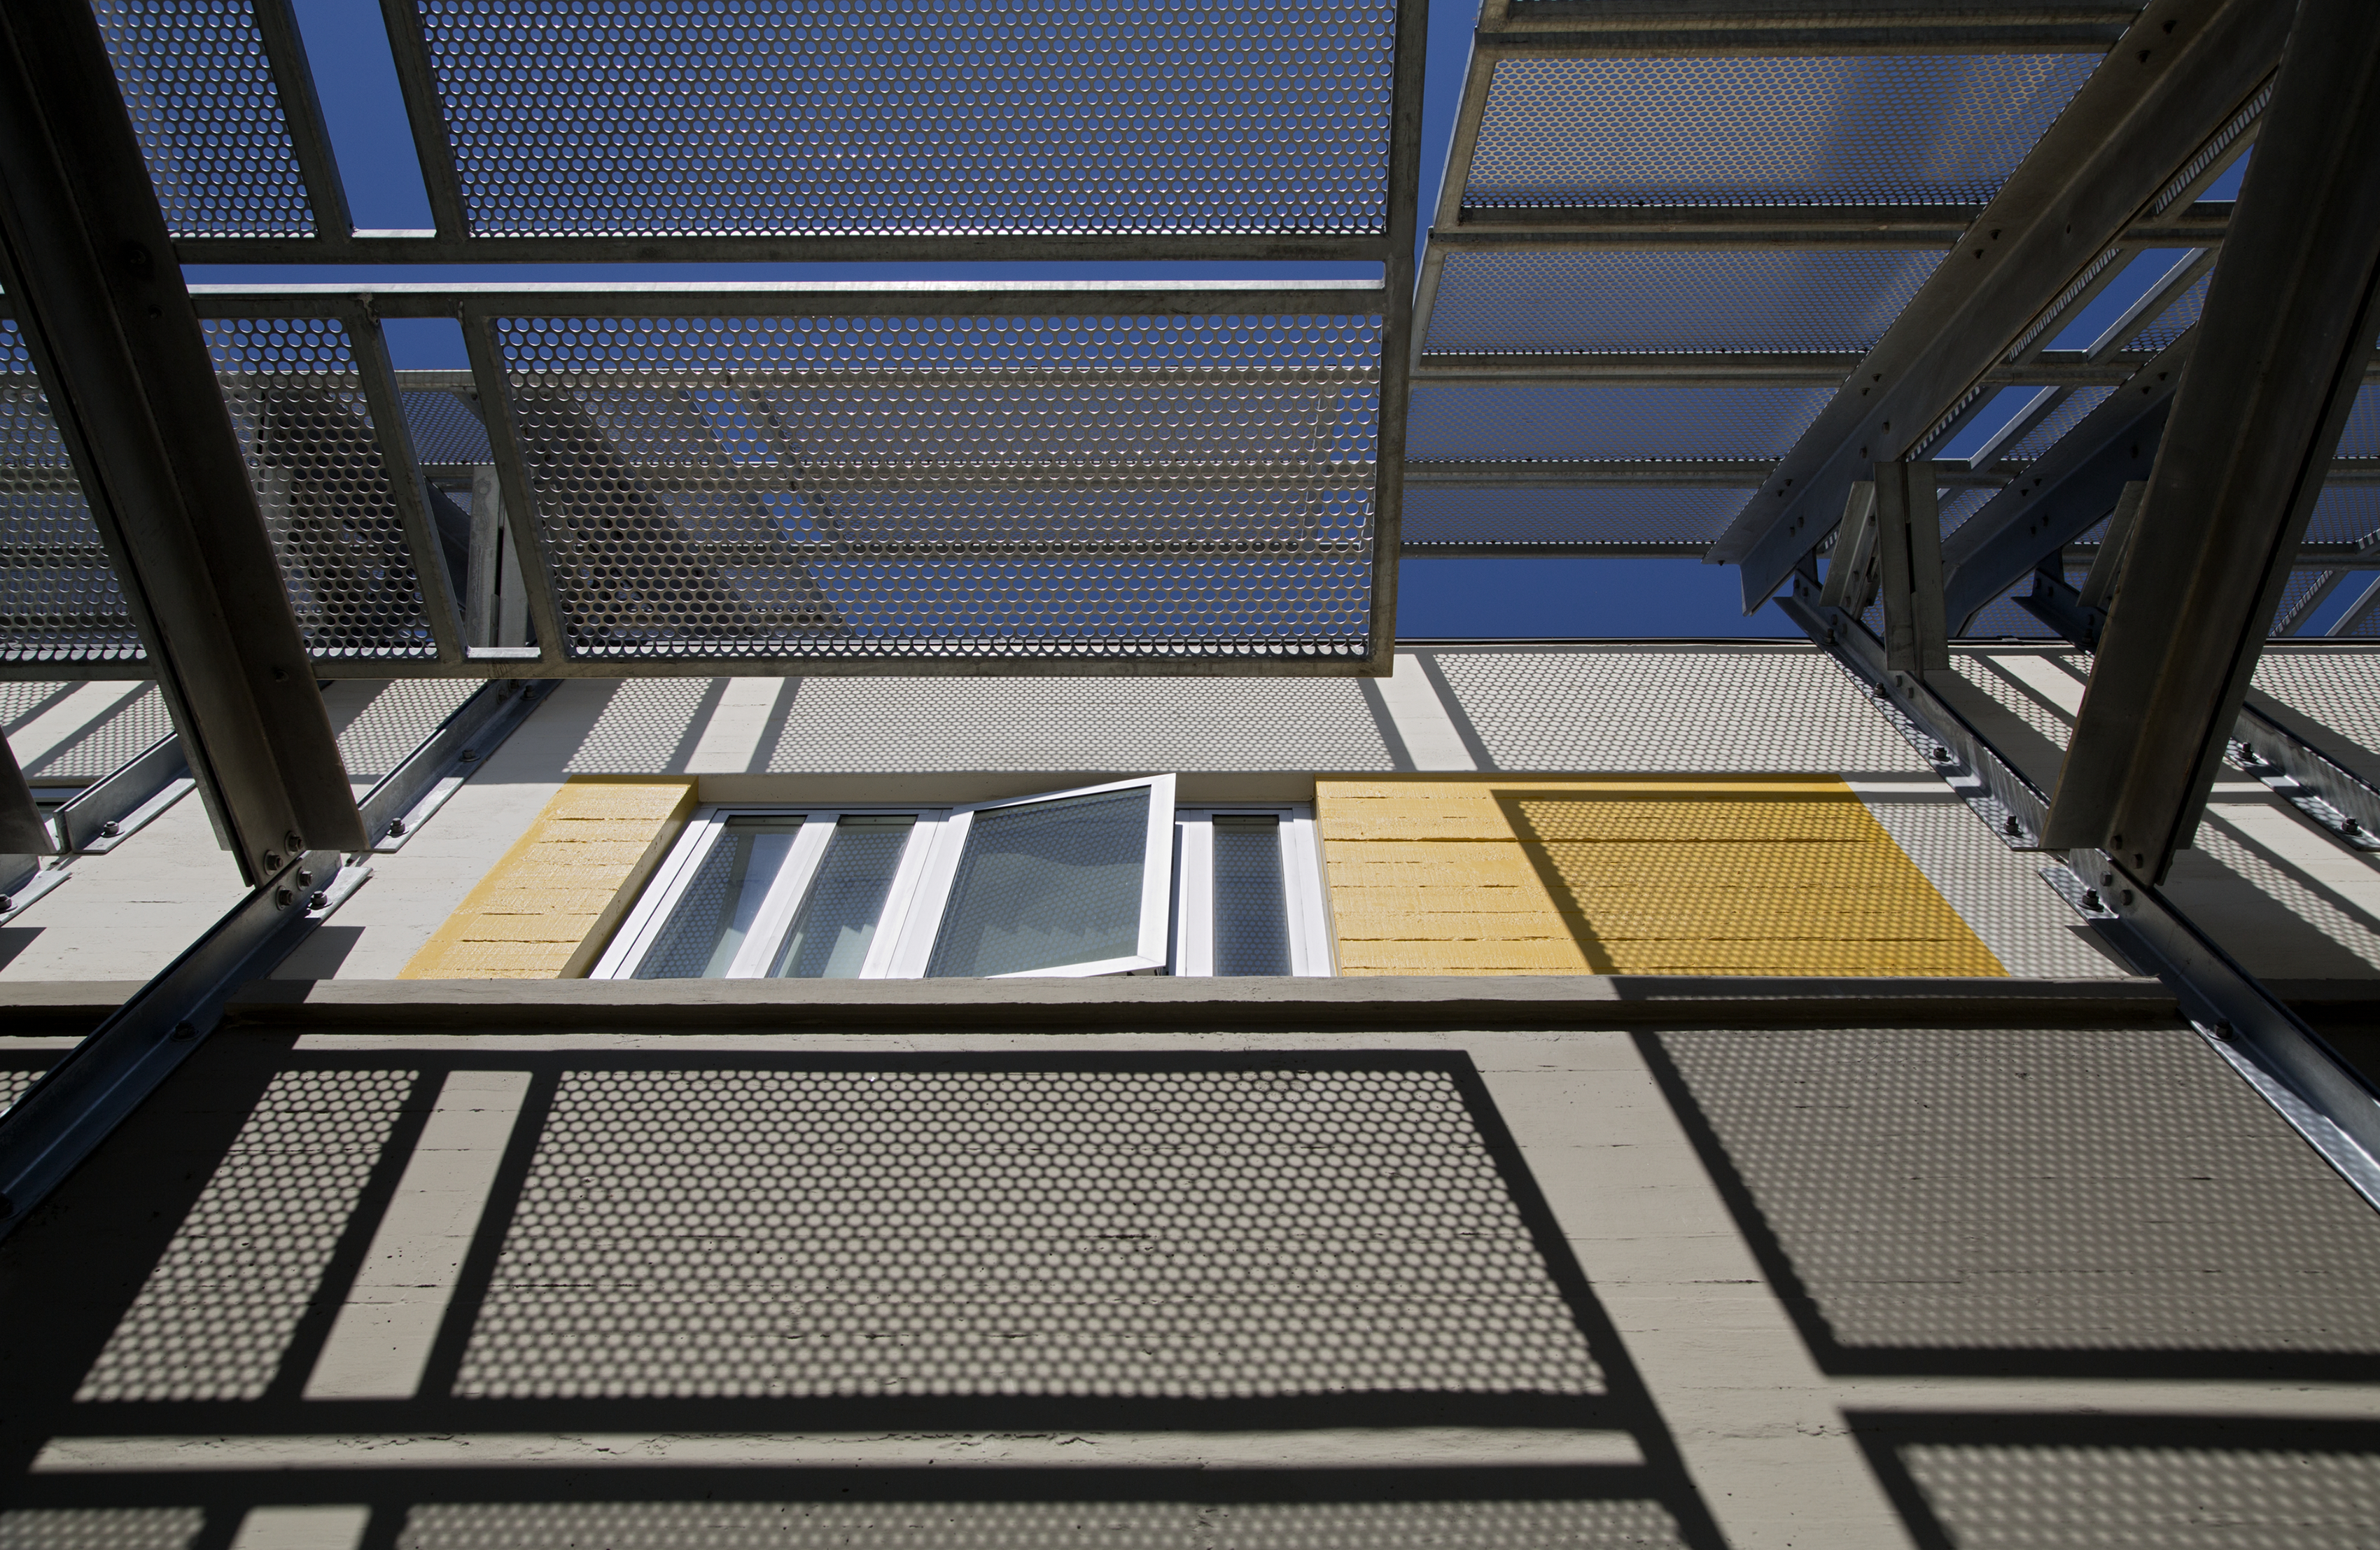 Looking up at the supportive housing units at Tassafaronga Village in East Oakland, CA. 